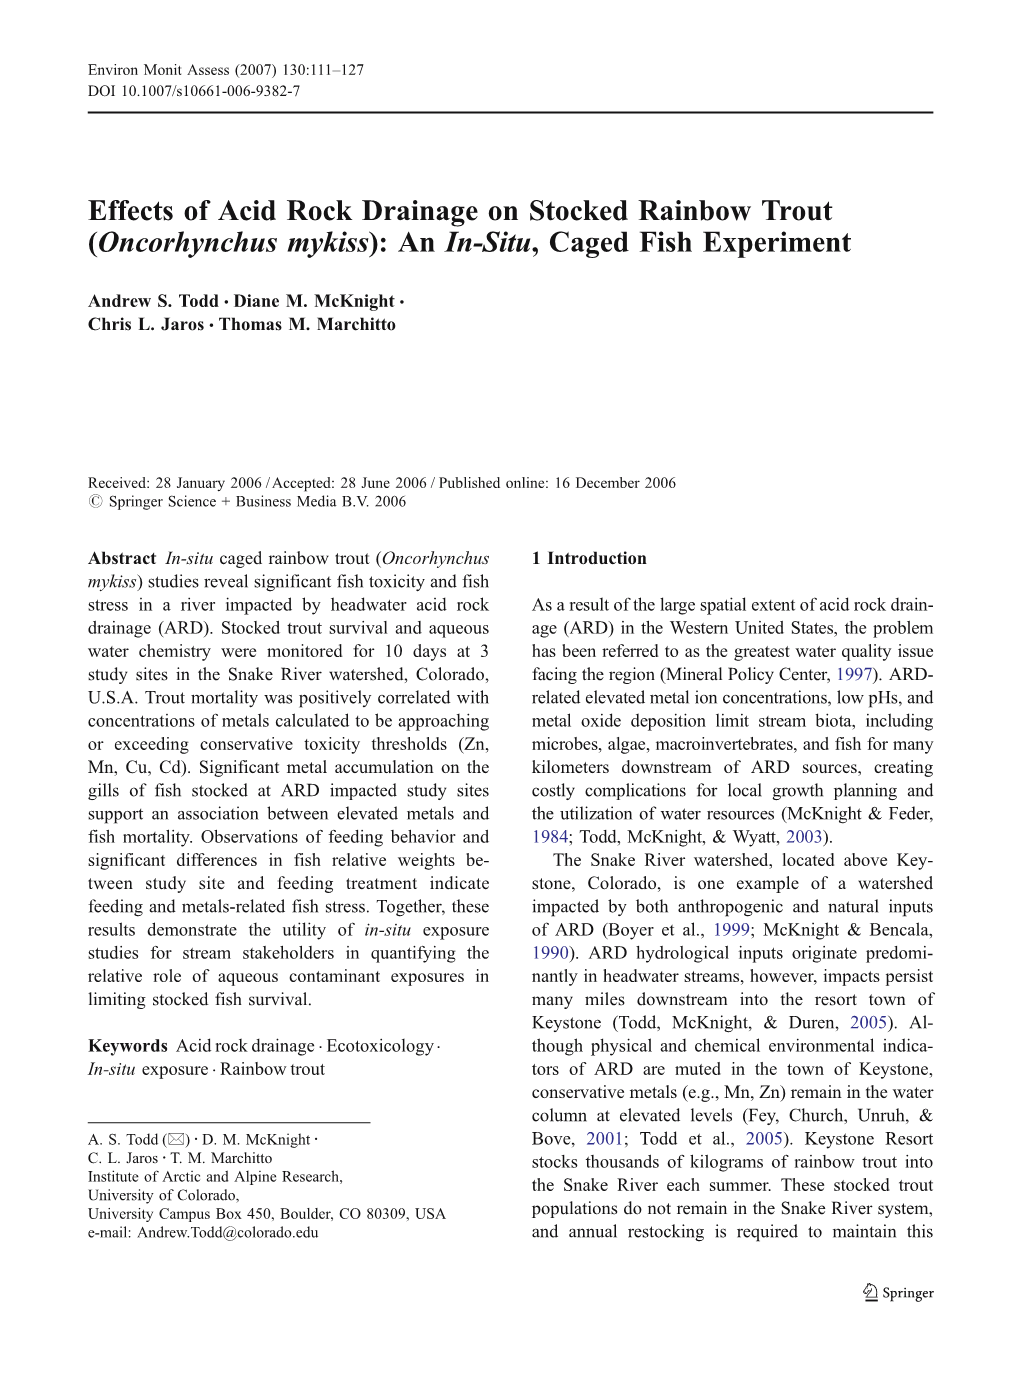 Effects of Acid Rock Drainage on Stocked Rainbow Trout (Oncorhynchus Mykiss): an In-Situ, Caged Fish Experiment